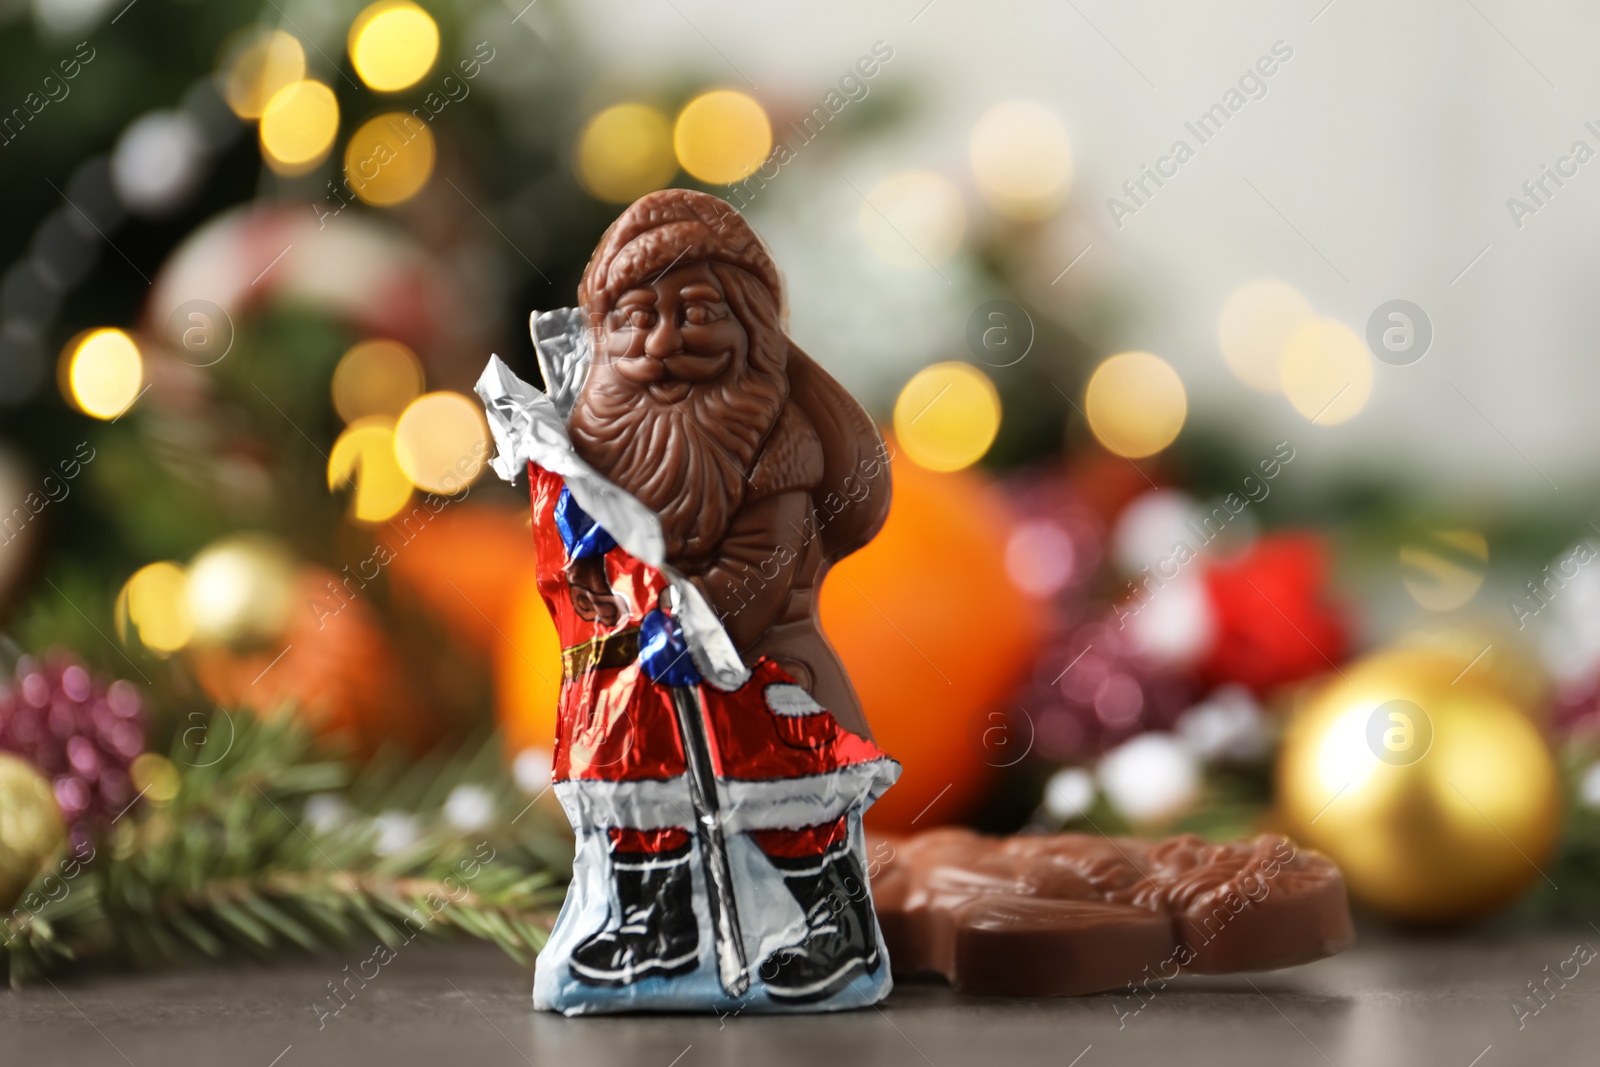 Photo of Chocolate Santa Claus candies on grey table